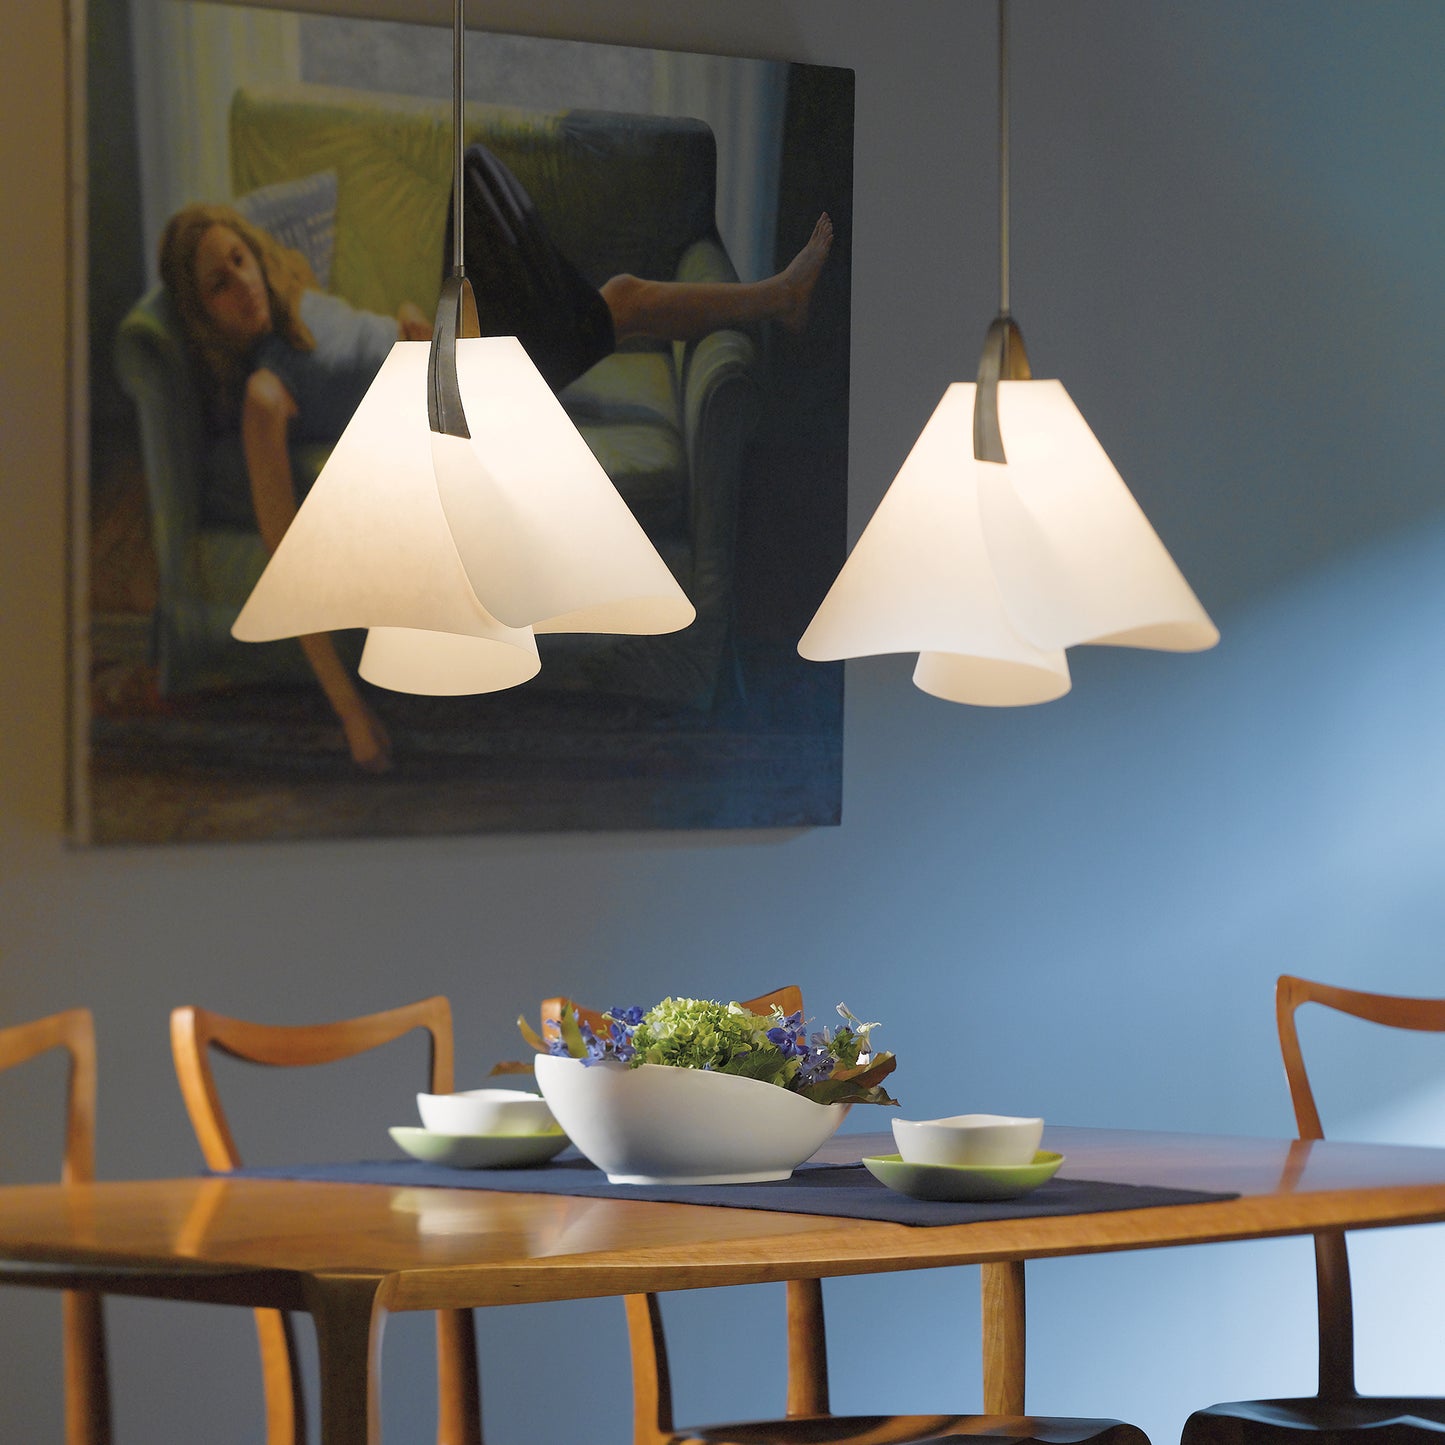 Wooden dining room table with Hubbardton Forge's Mobius Small Pendant lighting.